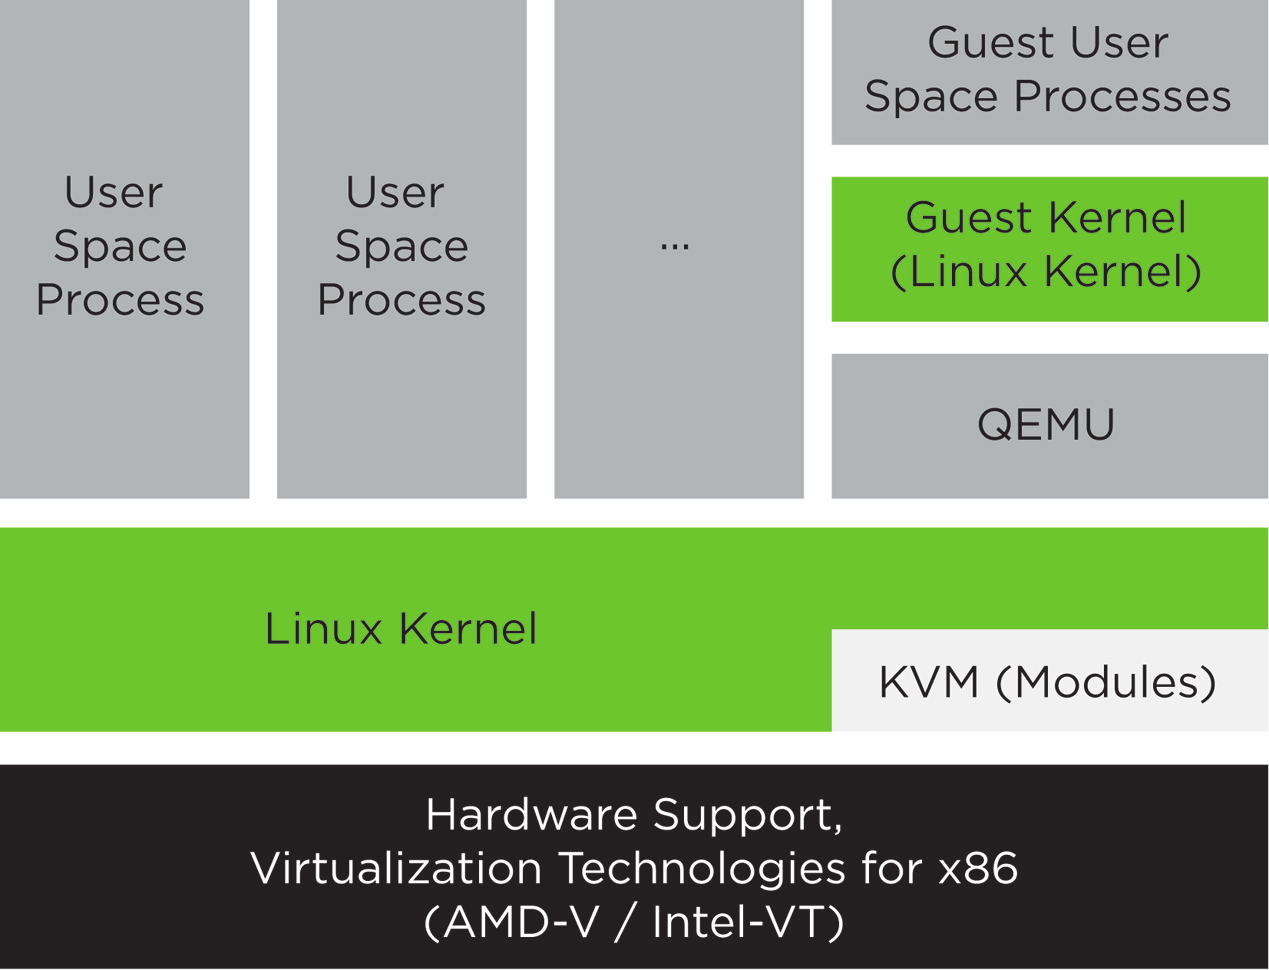 Virtualization architecture showing QEMU sitting between the Guest OS and KVM